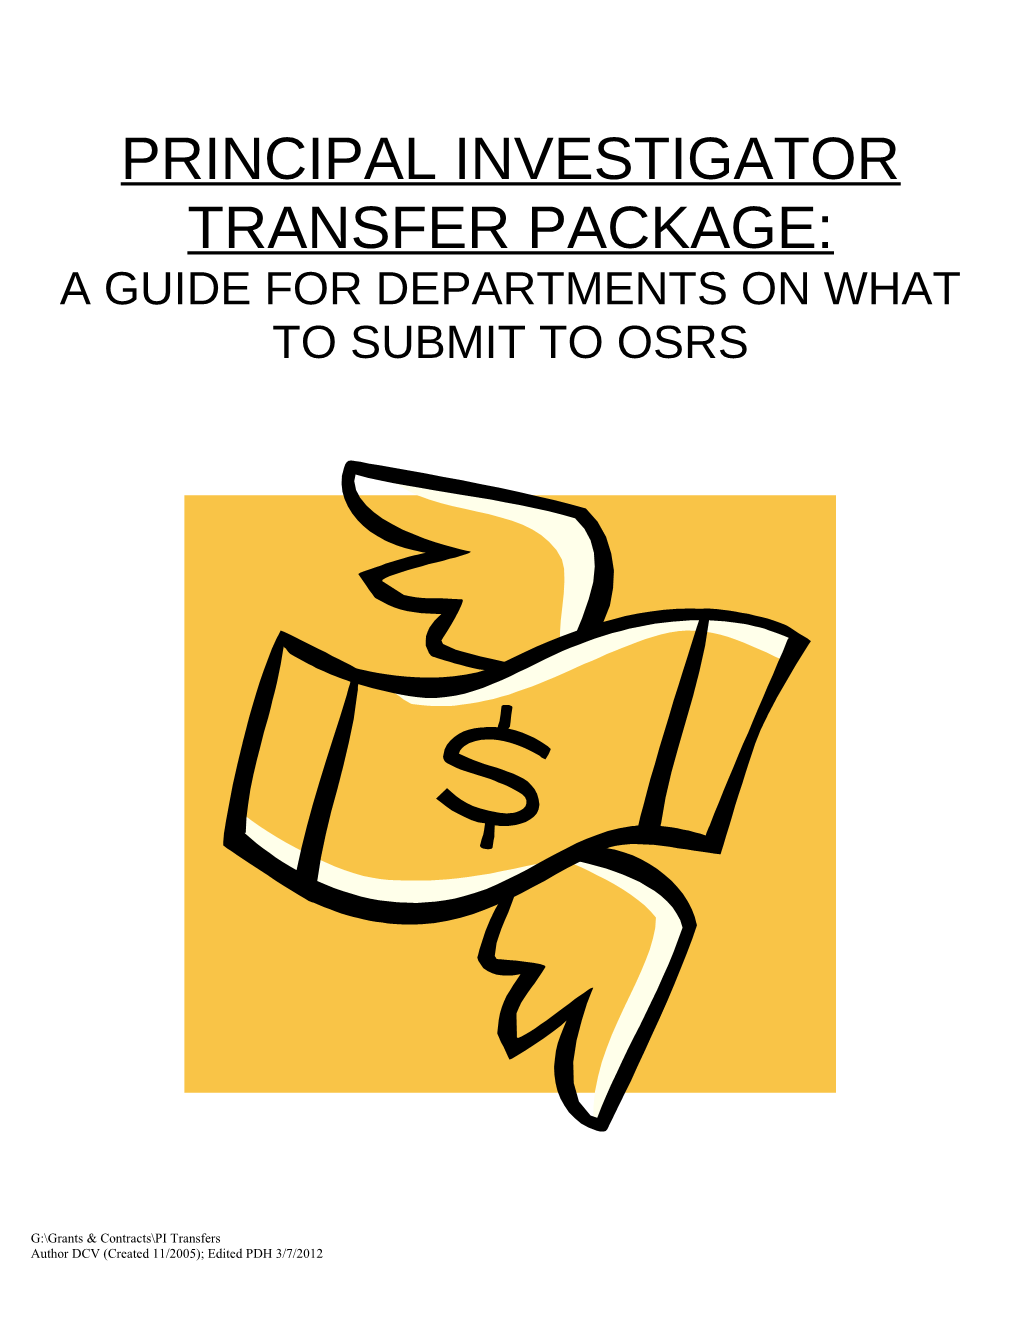 A Guide for Departments on What to Submit to Osrs